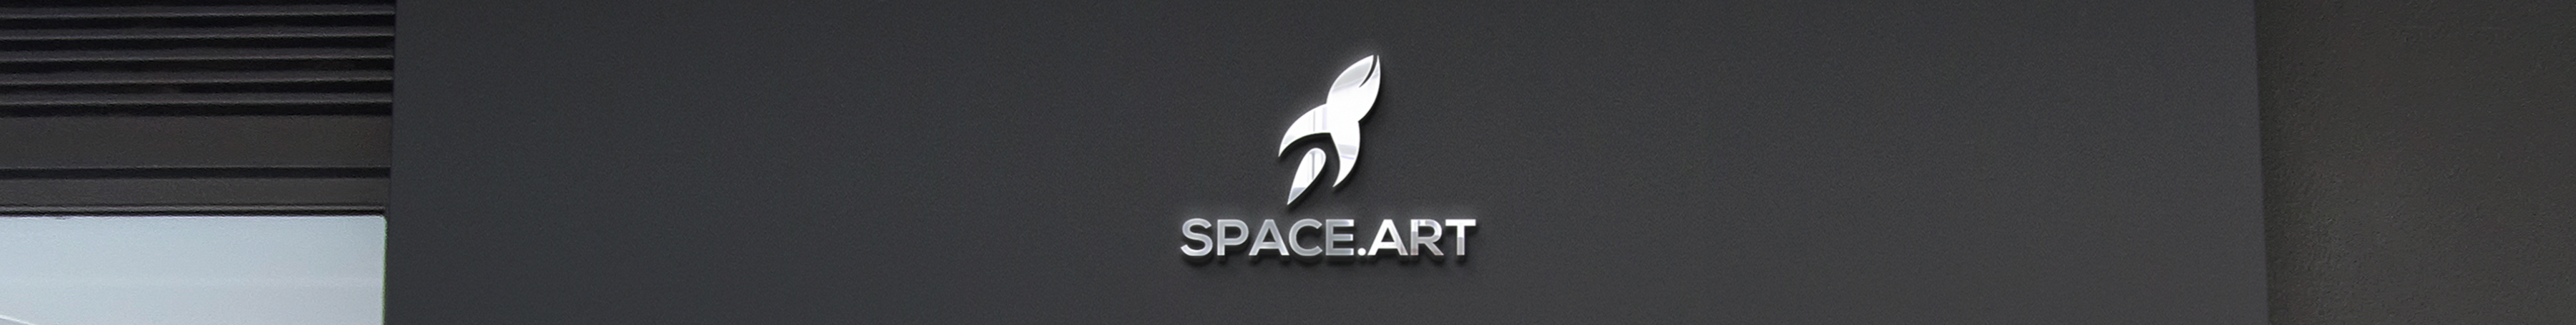 Space Art's profile banner